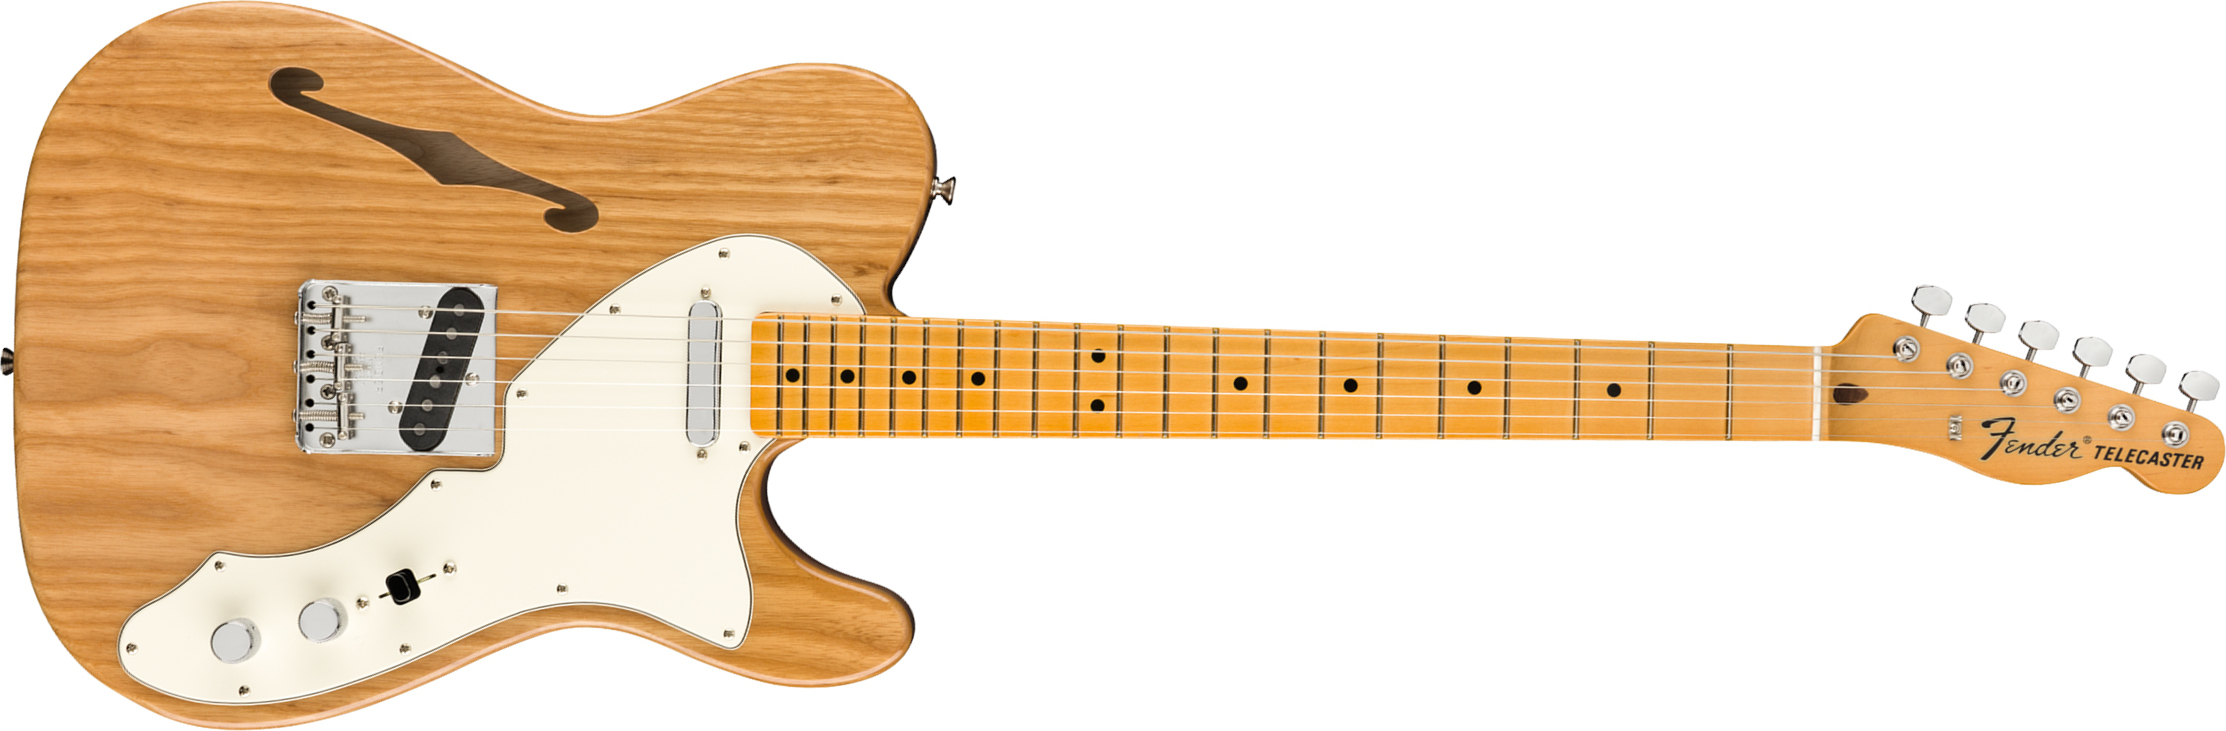 Fender Tele 60s Thinline American Original Usa Ss Mn - Aged Natural - Semi-hollow electric guitar - Main picture